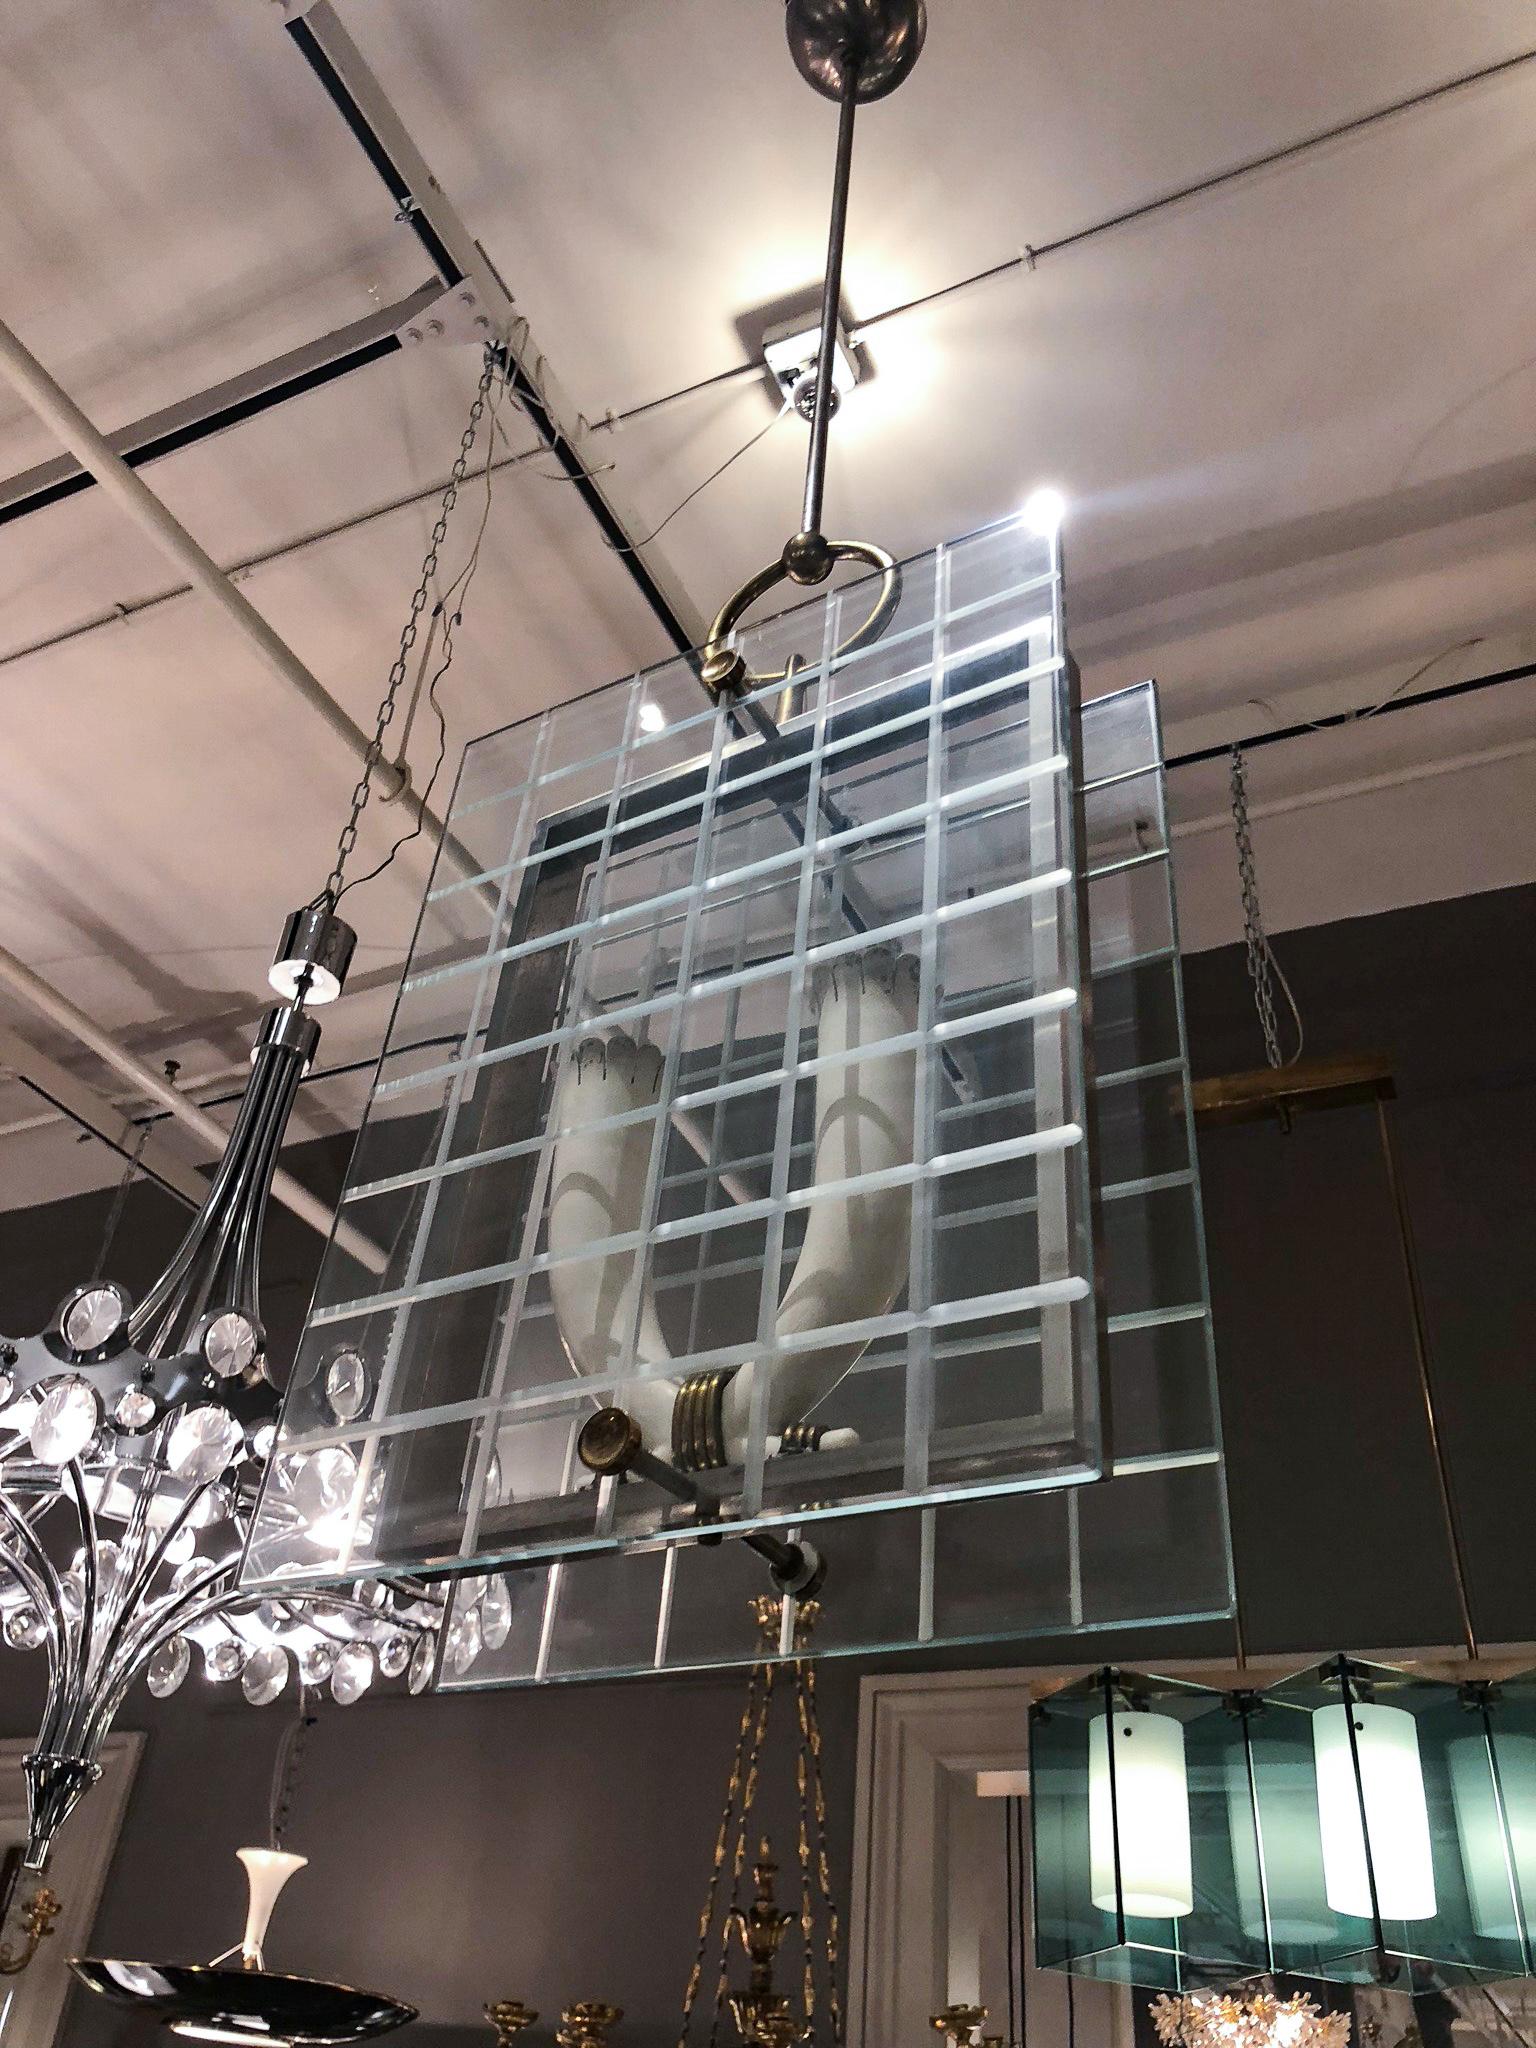 Two glass panes etched with a grid motif, enclosing two upturned lights in a rectangular nickel-finished frame with brass trim, suspended from a single rod.
Measures: Lantern body height 16-1/2”. 

OUR REFERENCE N8415